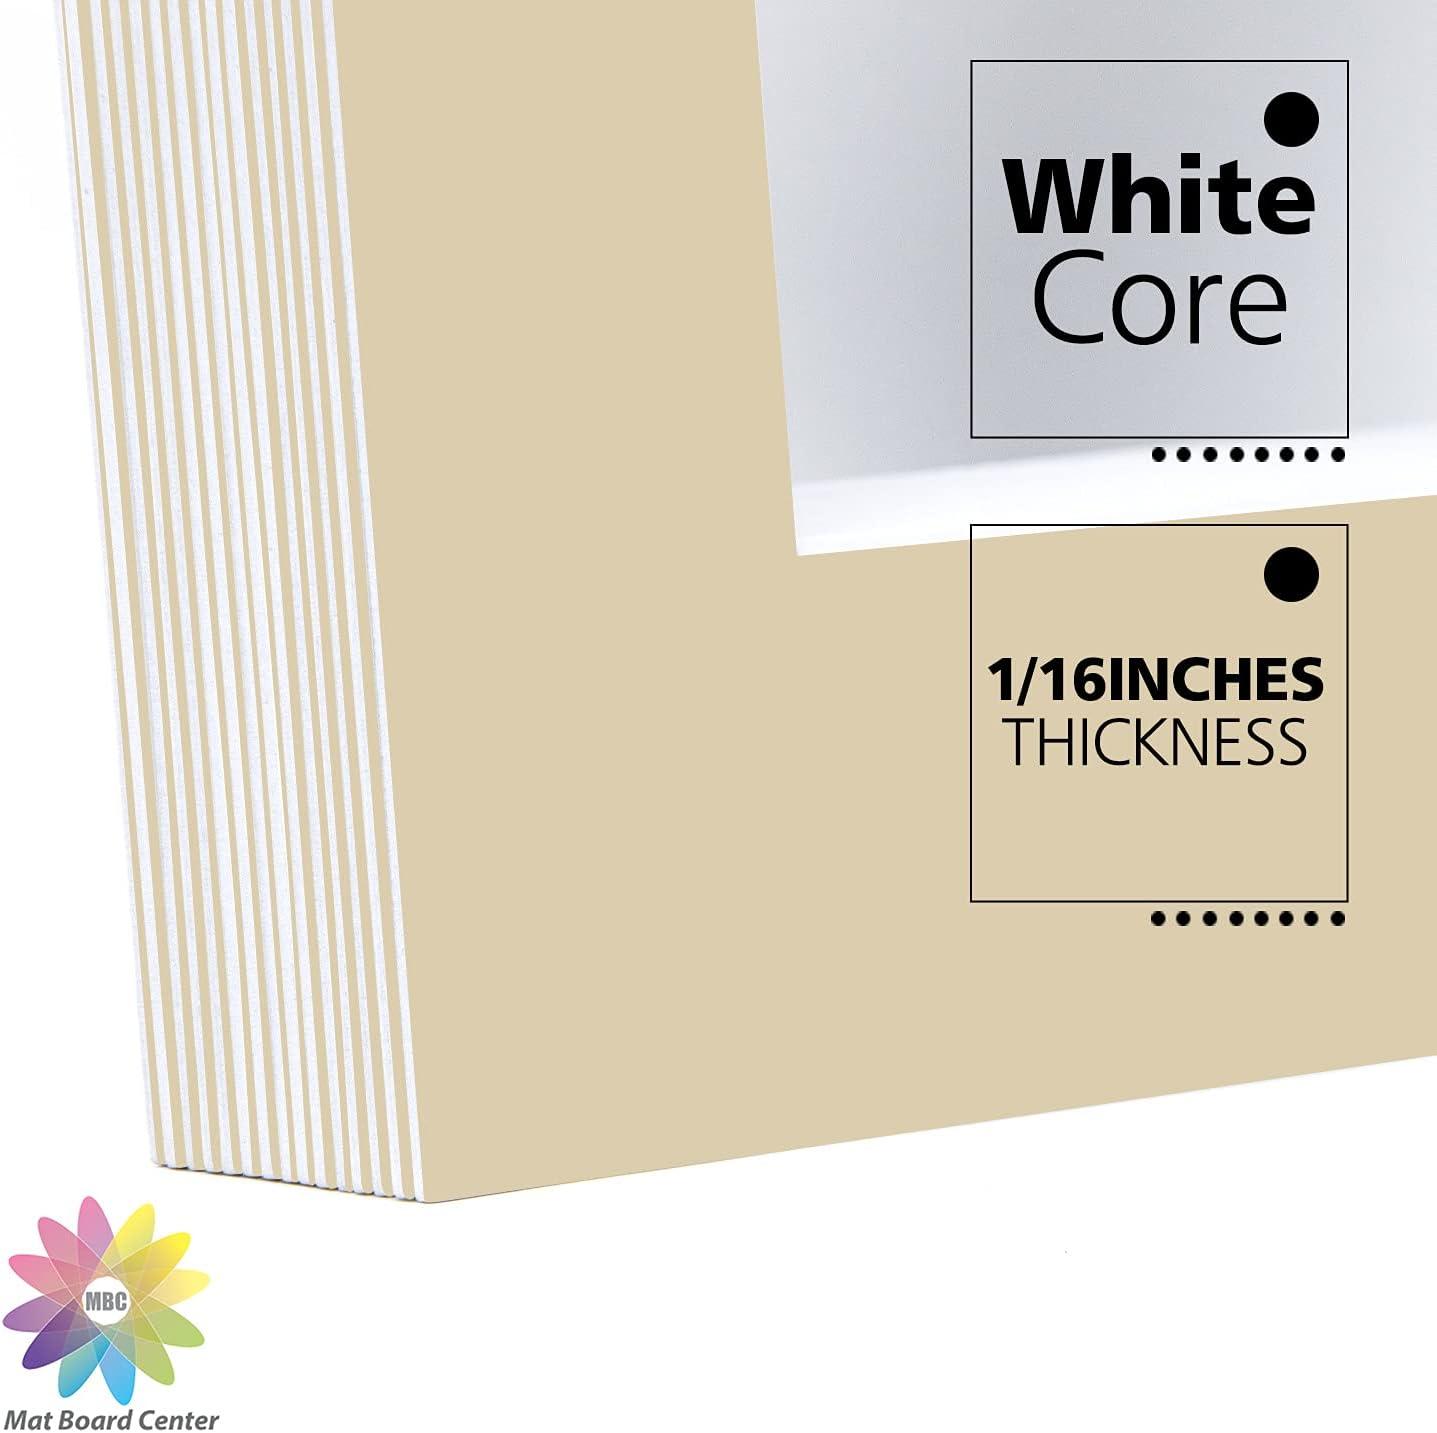 Mat Board Center Pack of 10 11x14 for 8x10 Compatible Beige Color Mats -  Acid Free 4-ply Thickness White Core - for Pictures Photos Framing